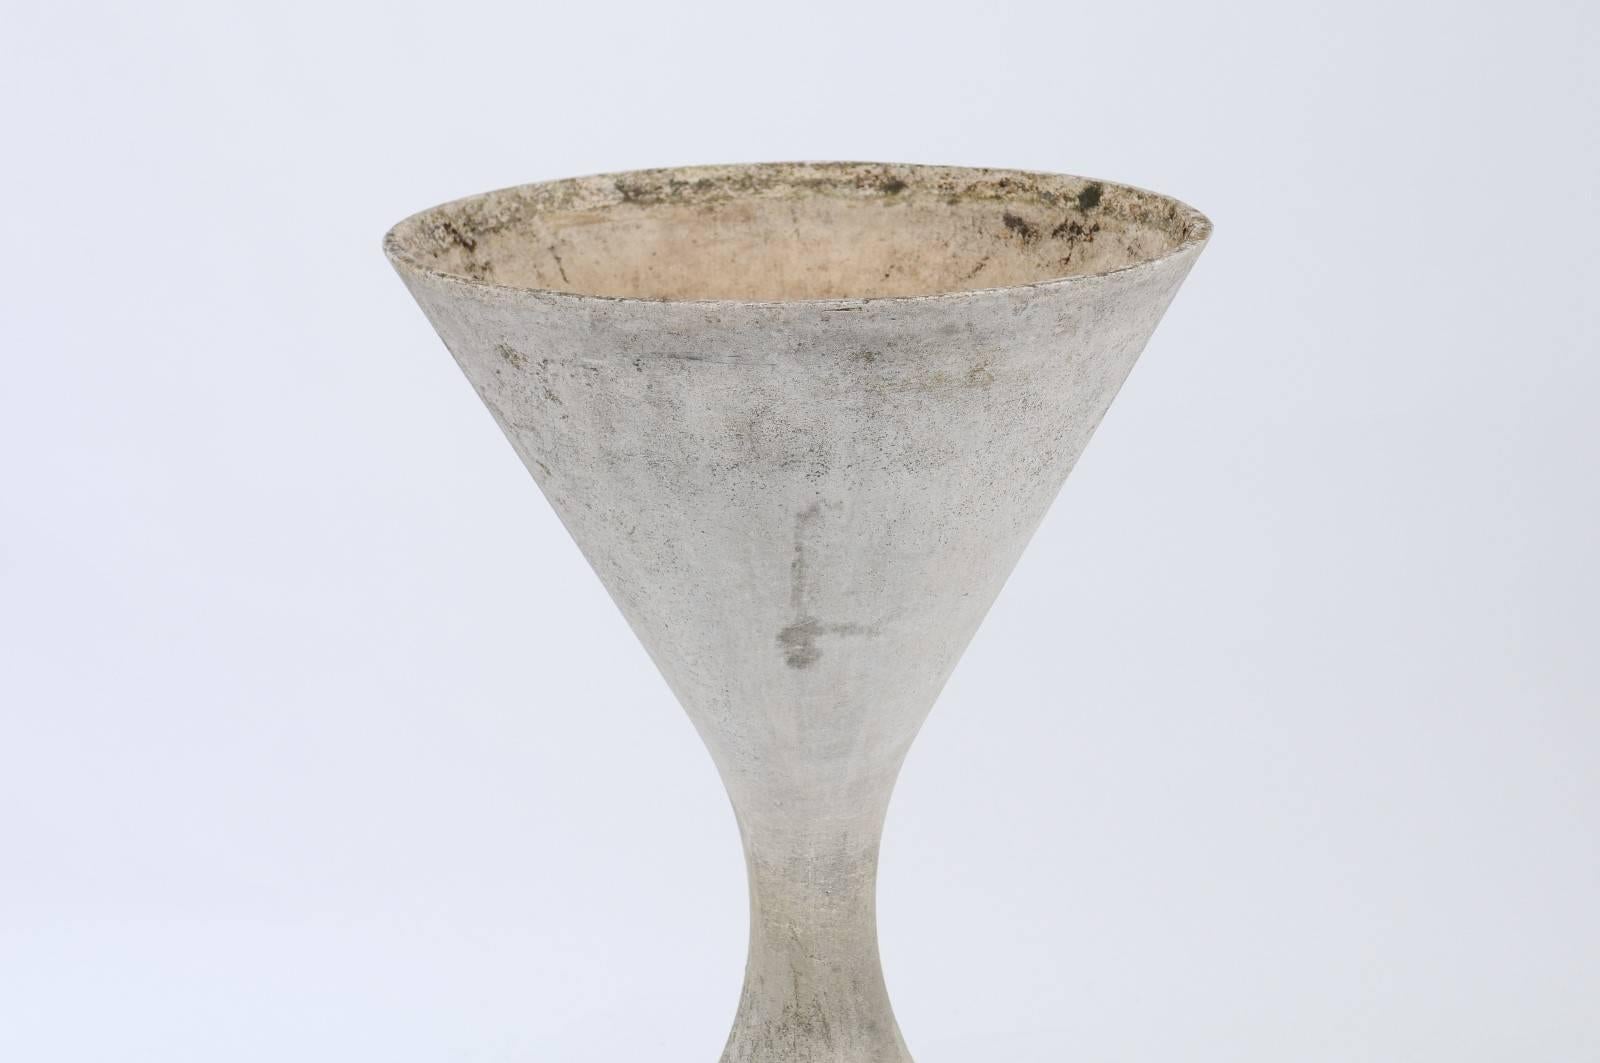 Mid-Century Modern Willy Guhl Fiber Cement Diabolo Planter from Switzerland from the 1950s